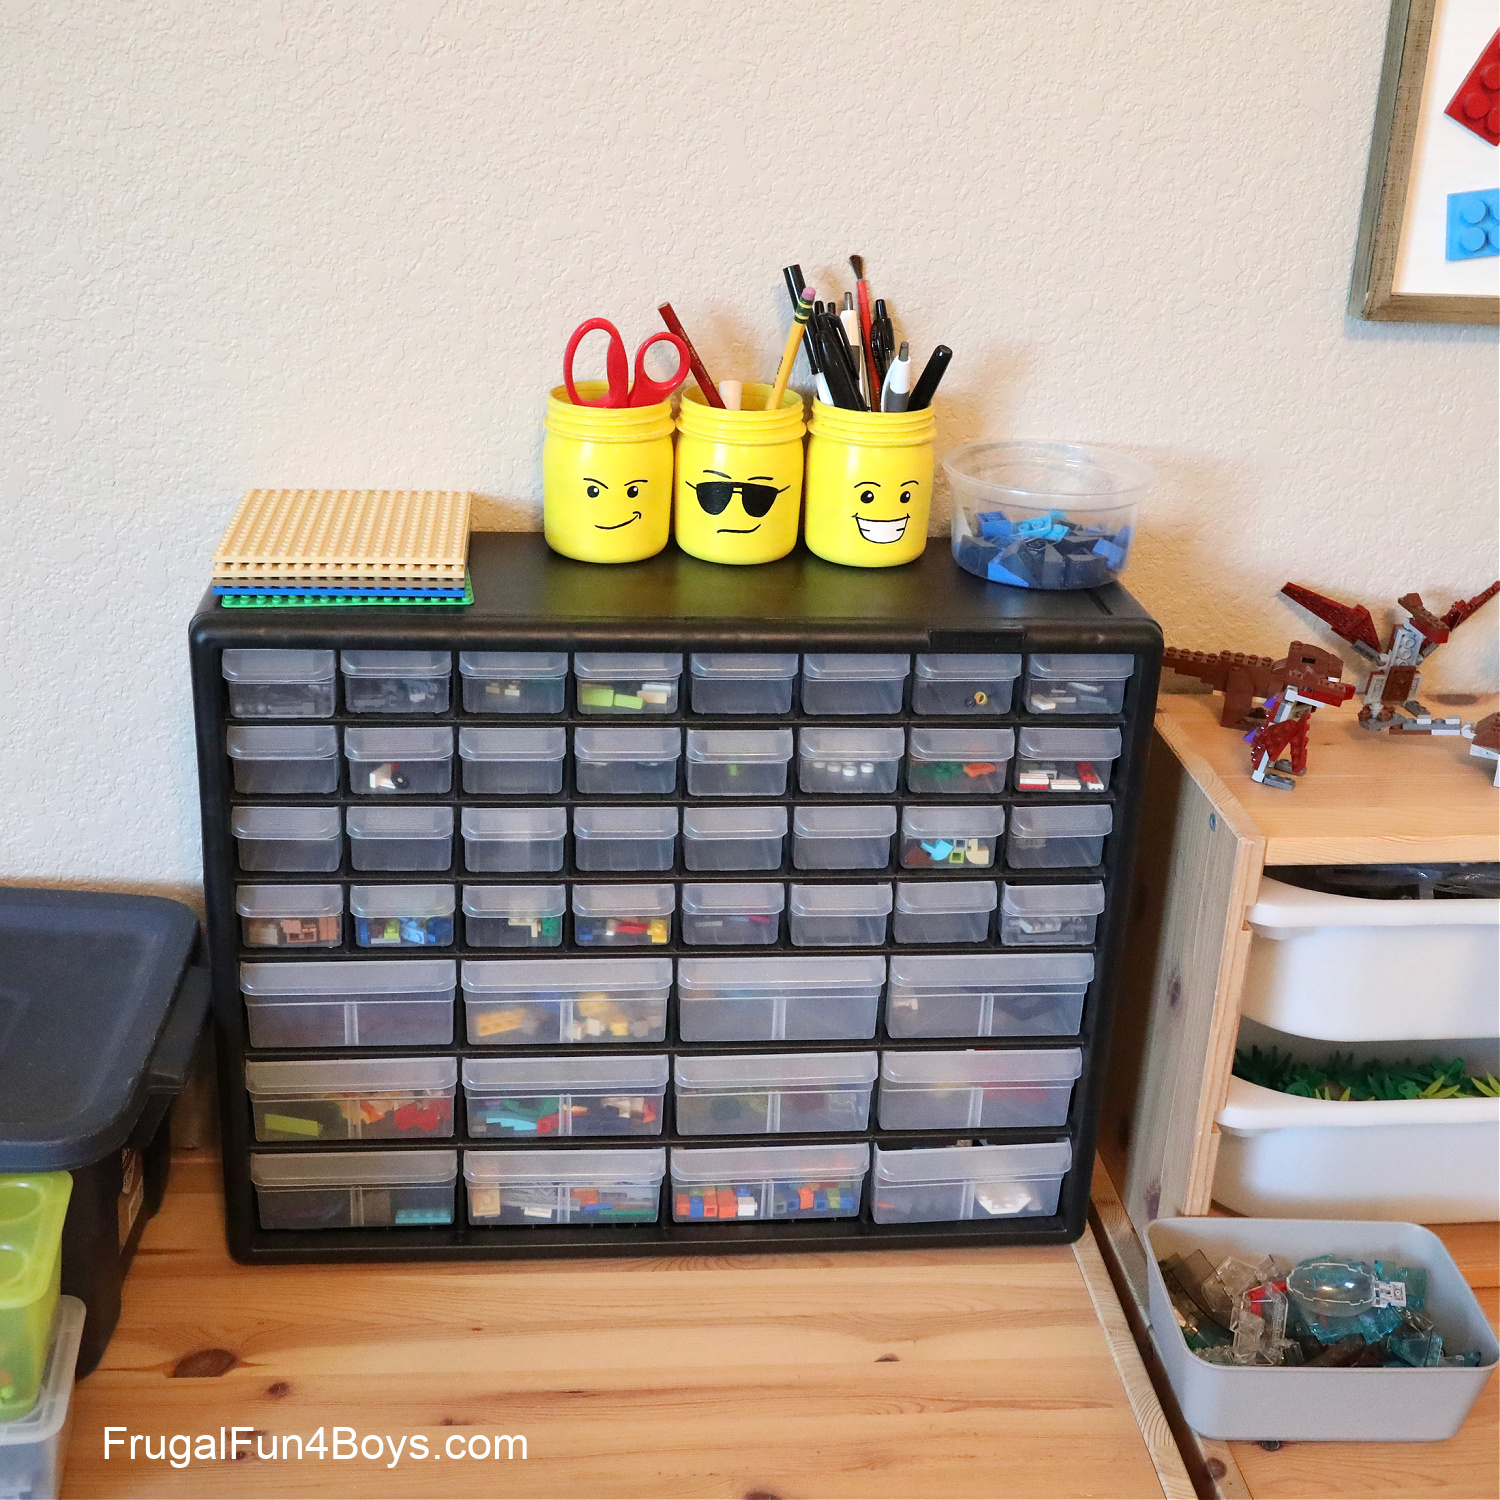 LEGO Storage Organization for More Efficient Building Fun For Boys and Girls